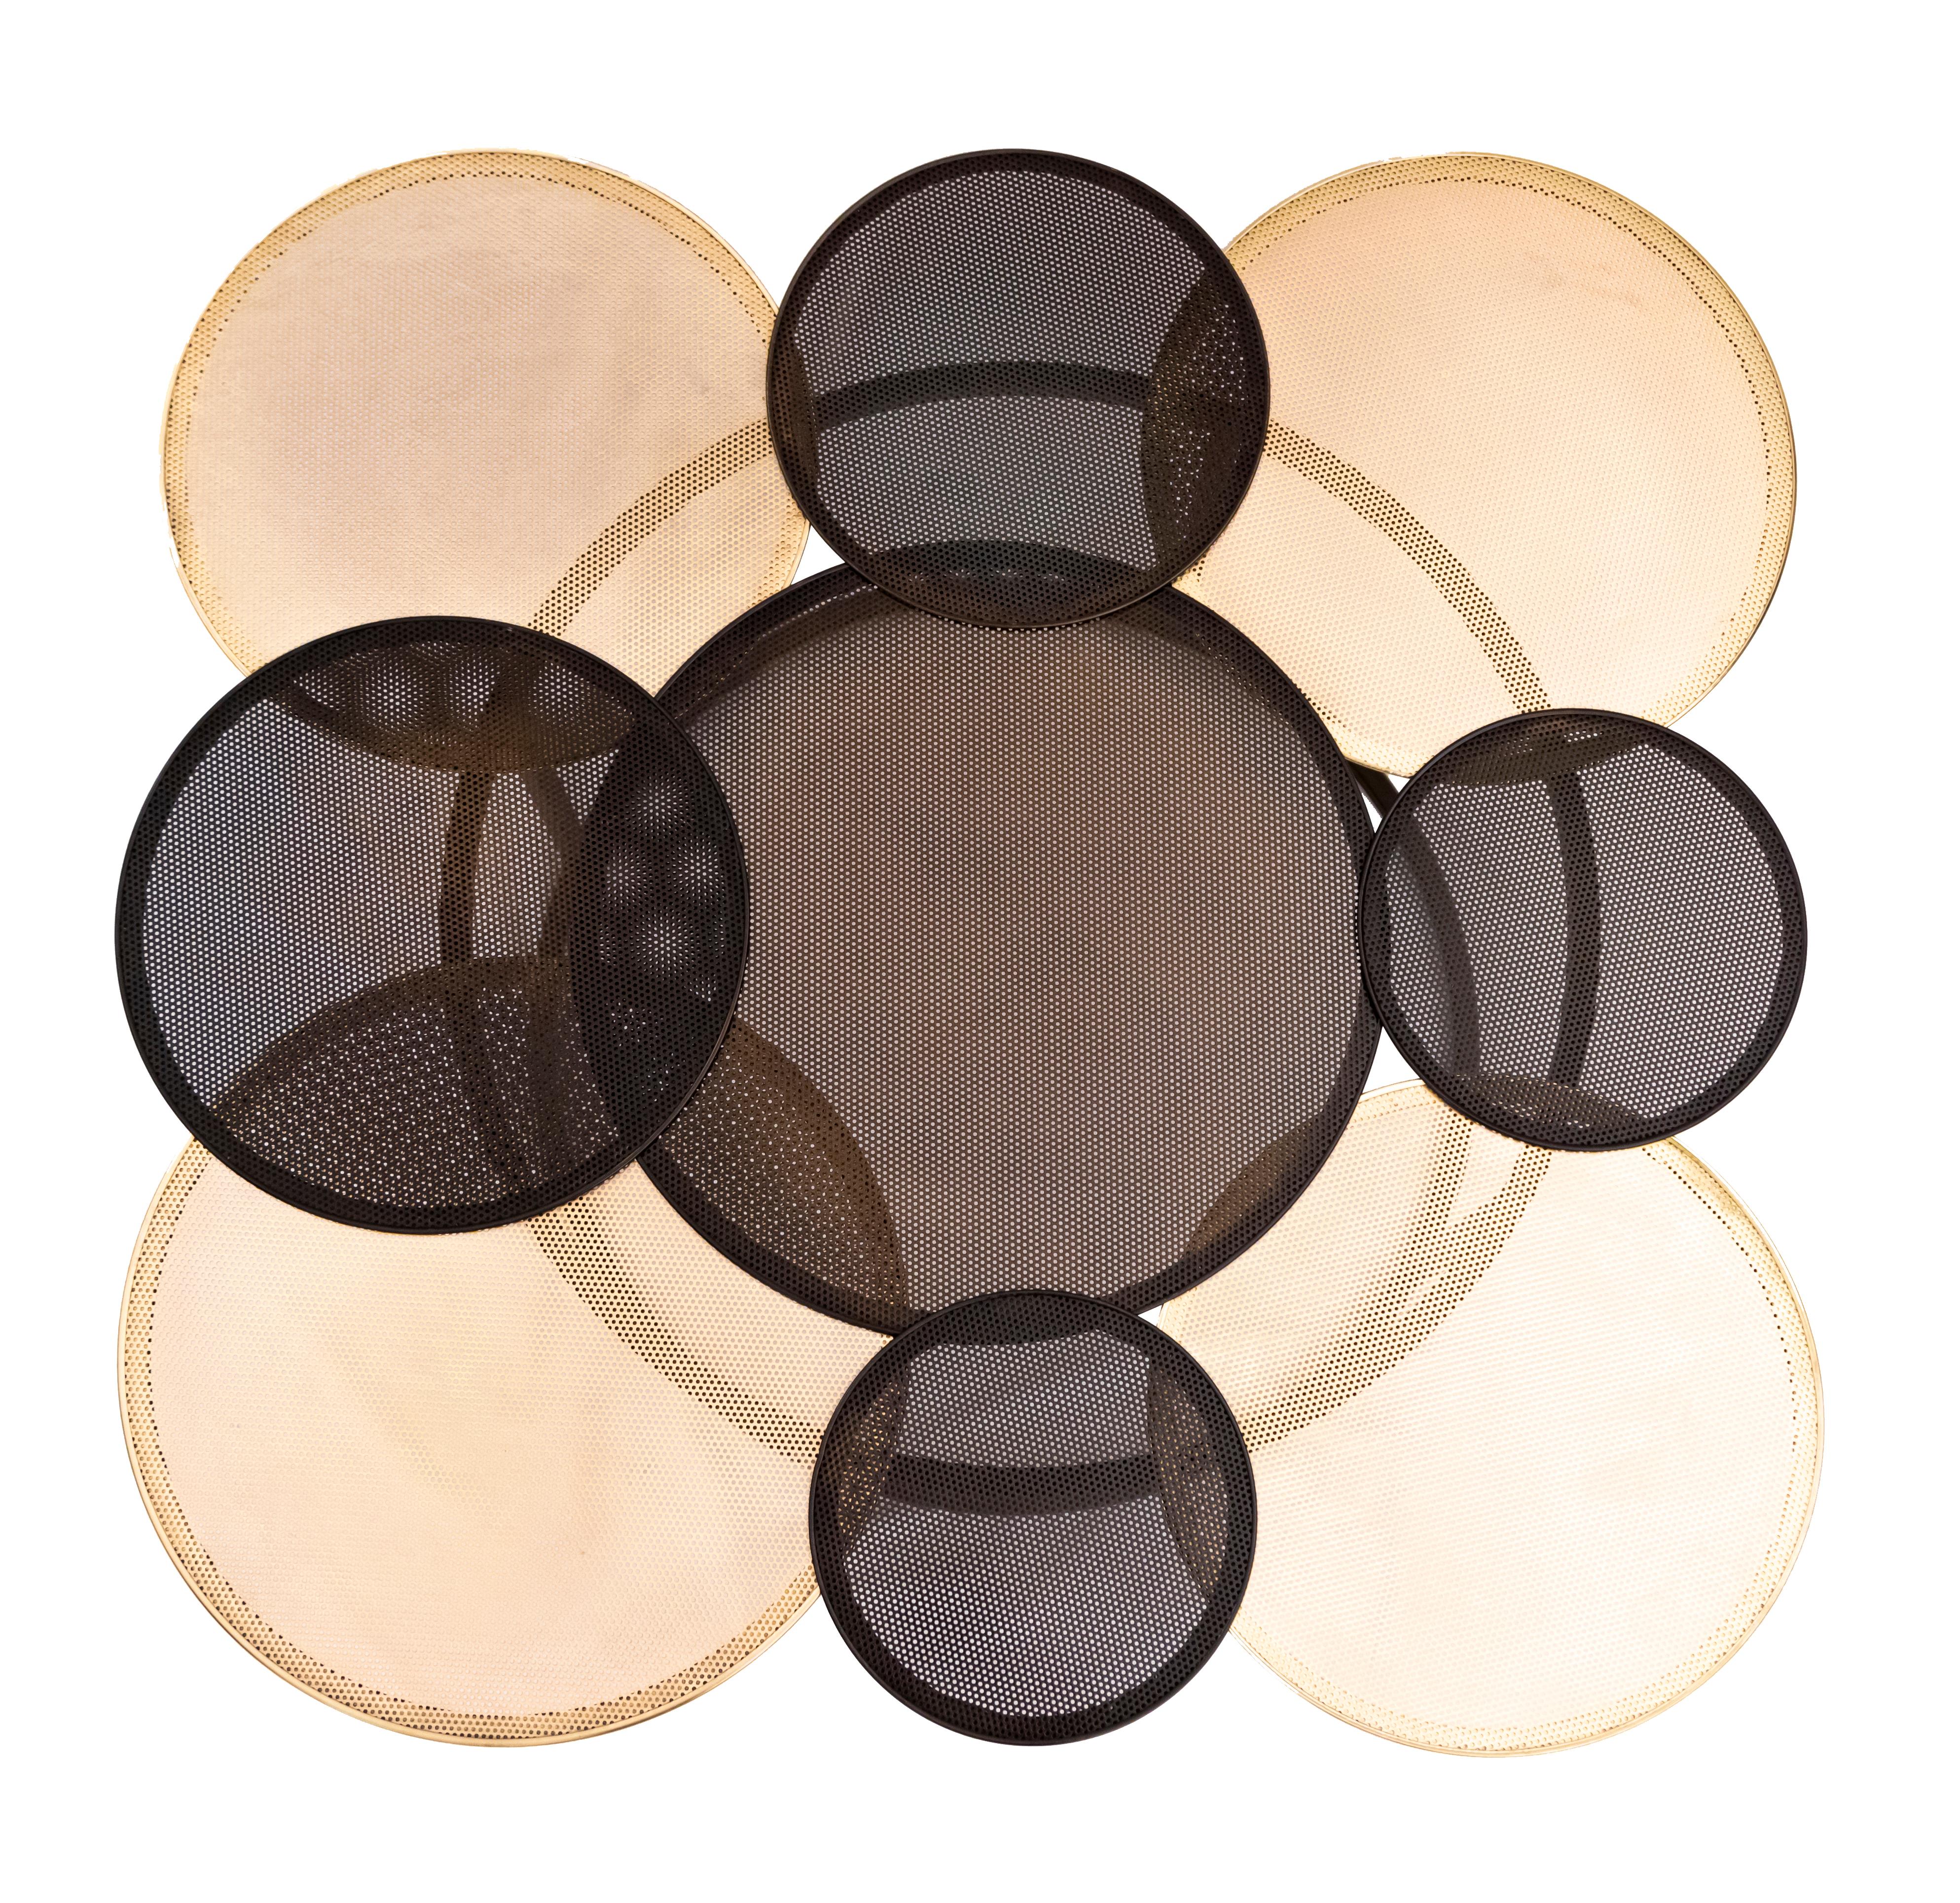 Perforated metal circles dipped in gold and with bronze patina.
There is currently 1 item in stock.